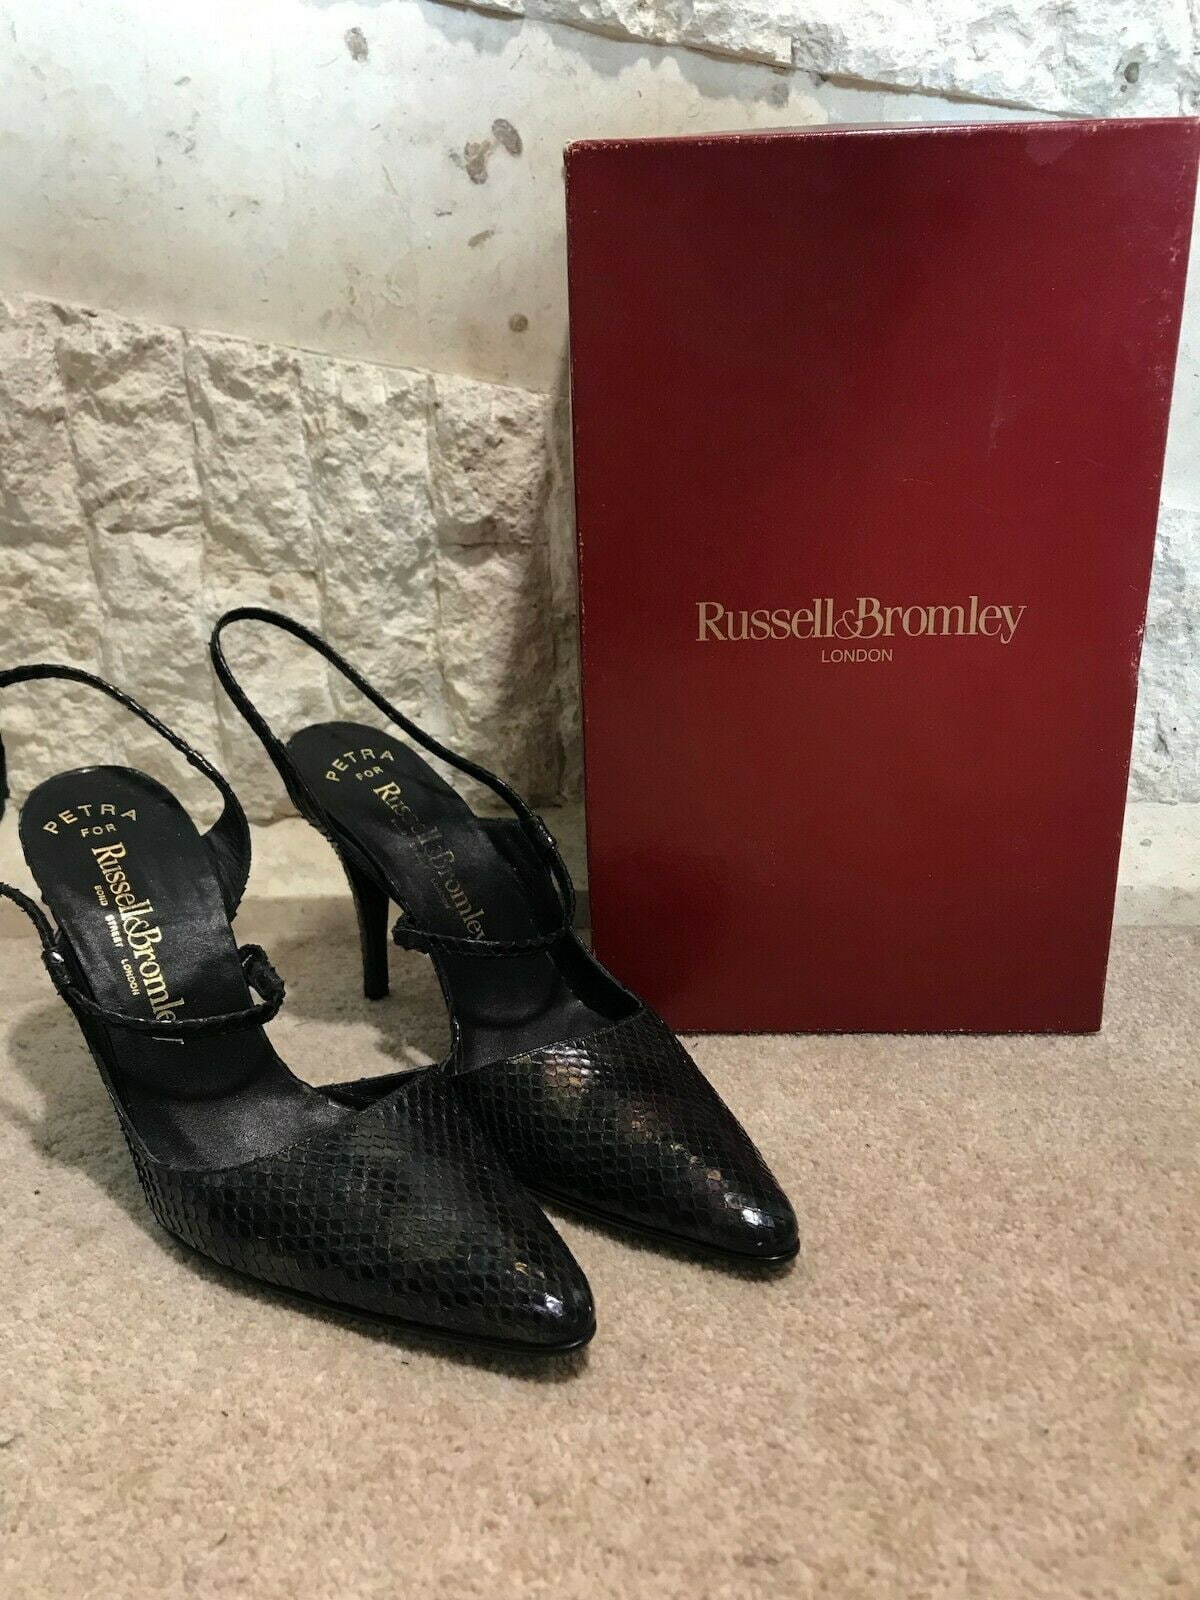 Russell & Bromley Women's Petrol Black Leather Slingback Shoes UK 4 New in original box Timeless Fashions